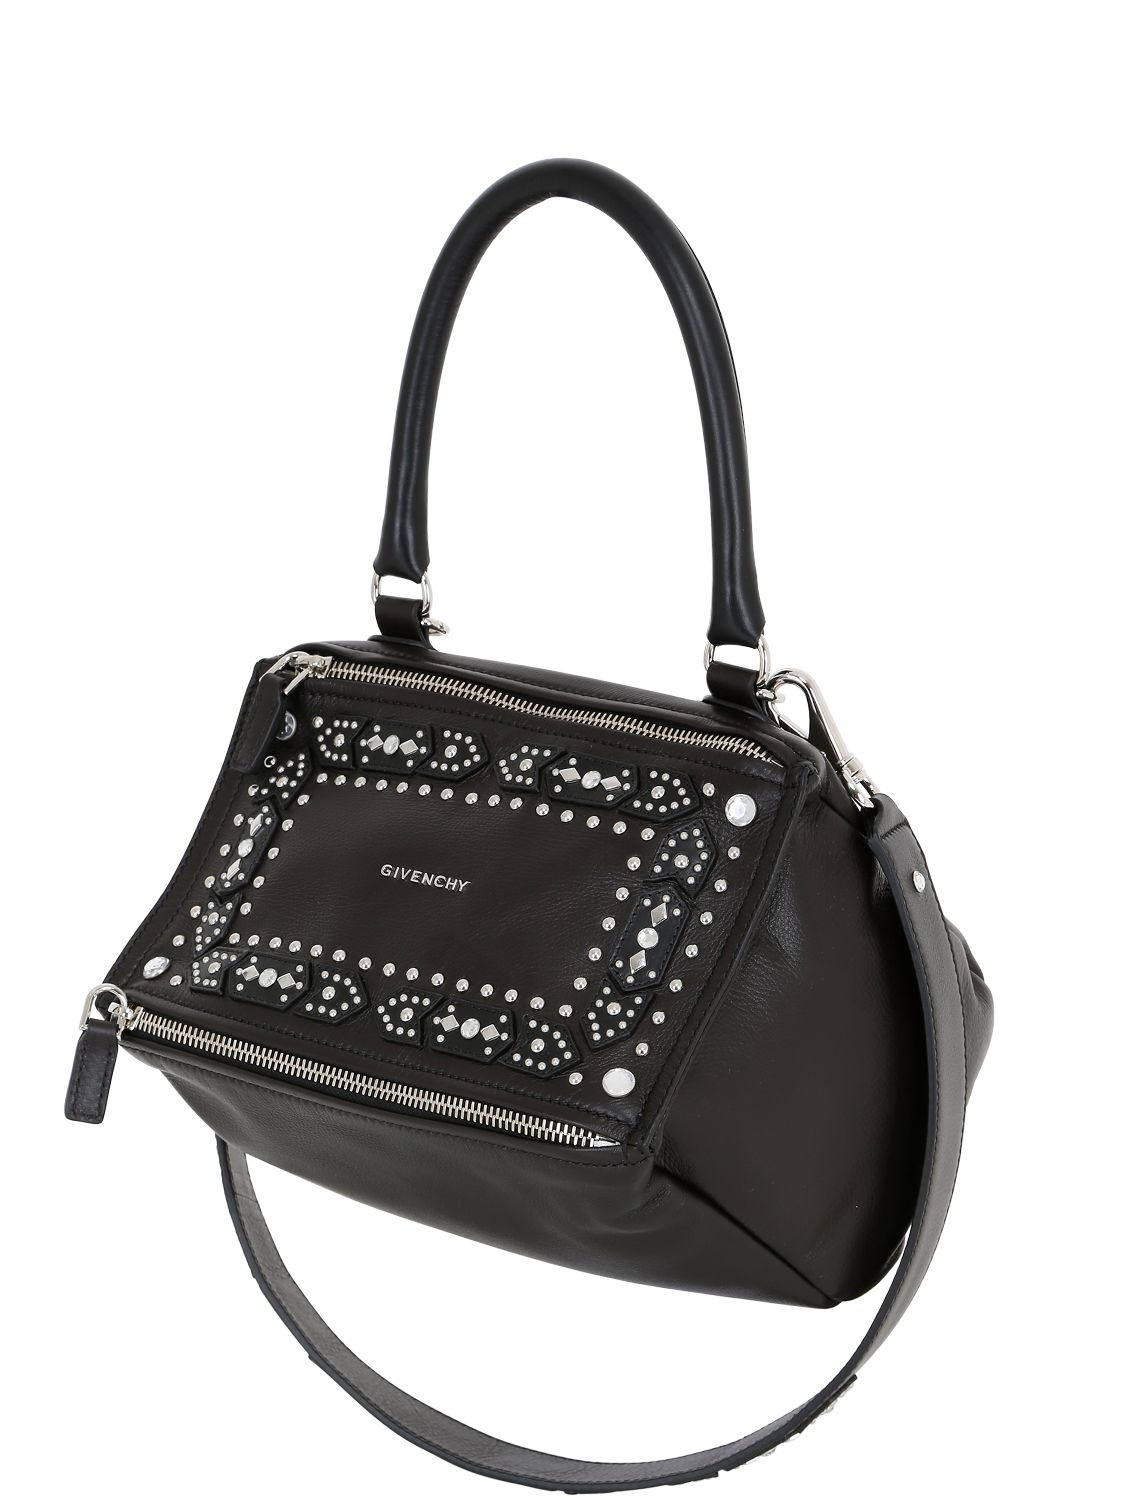 Givenchy Small Pandora Studded Leather Bag in Black | Lyst